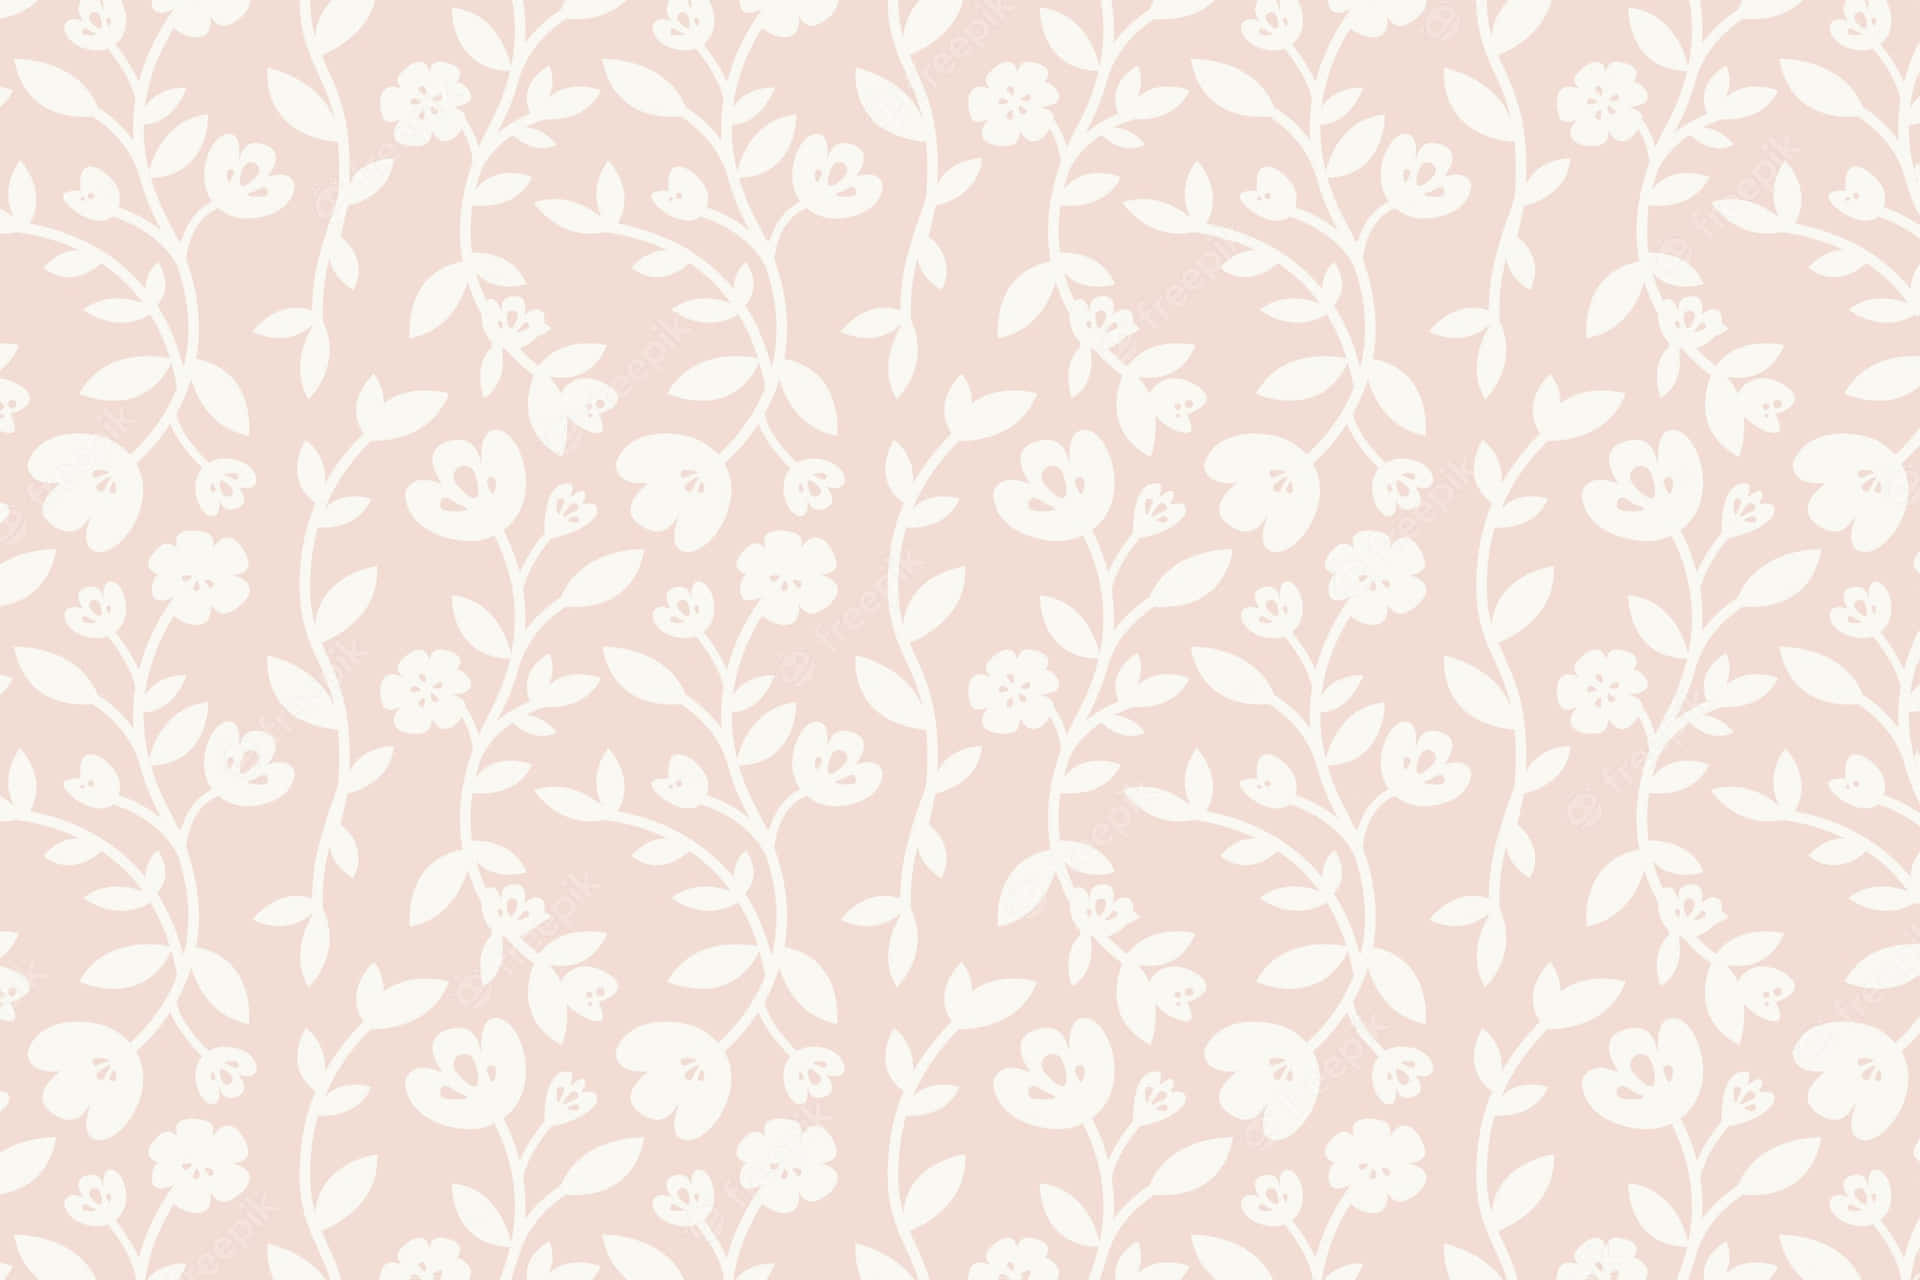 A vibrant and eye-catching floral pattern against a neutral backdrop.